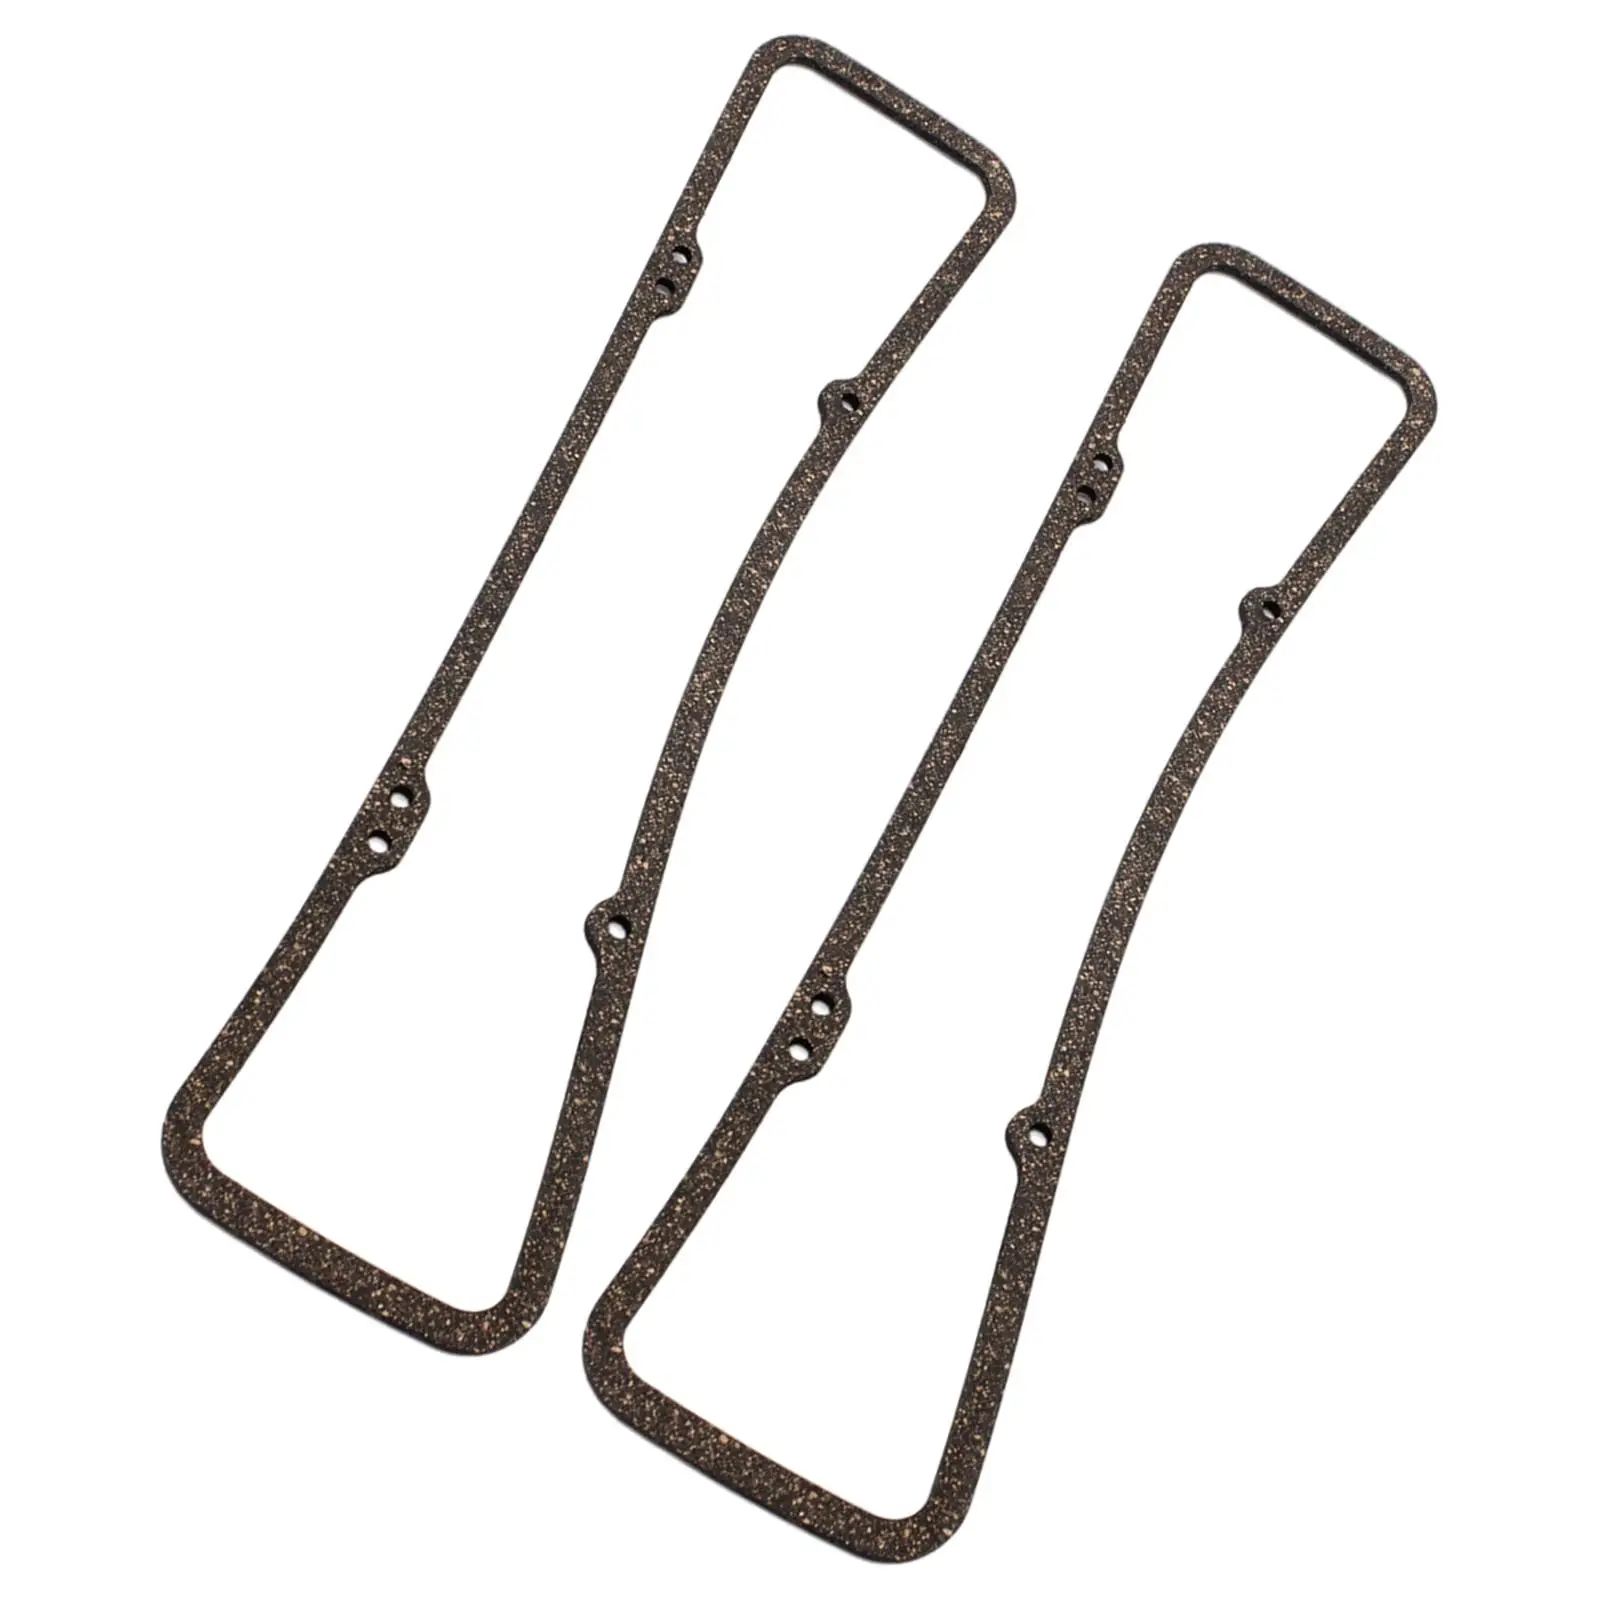 Valve Cover Gaskets Set 7483 2x for 305 327 350 383 400 Engines